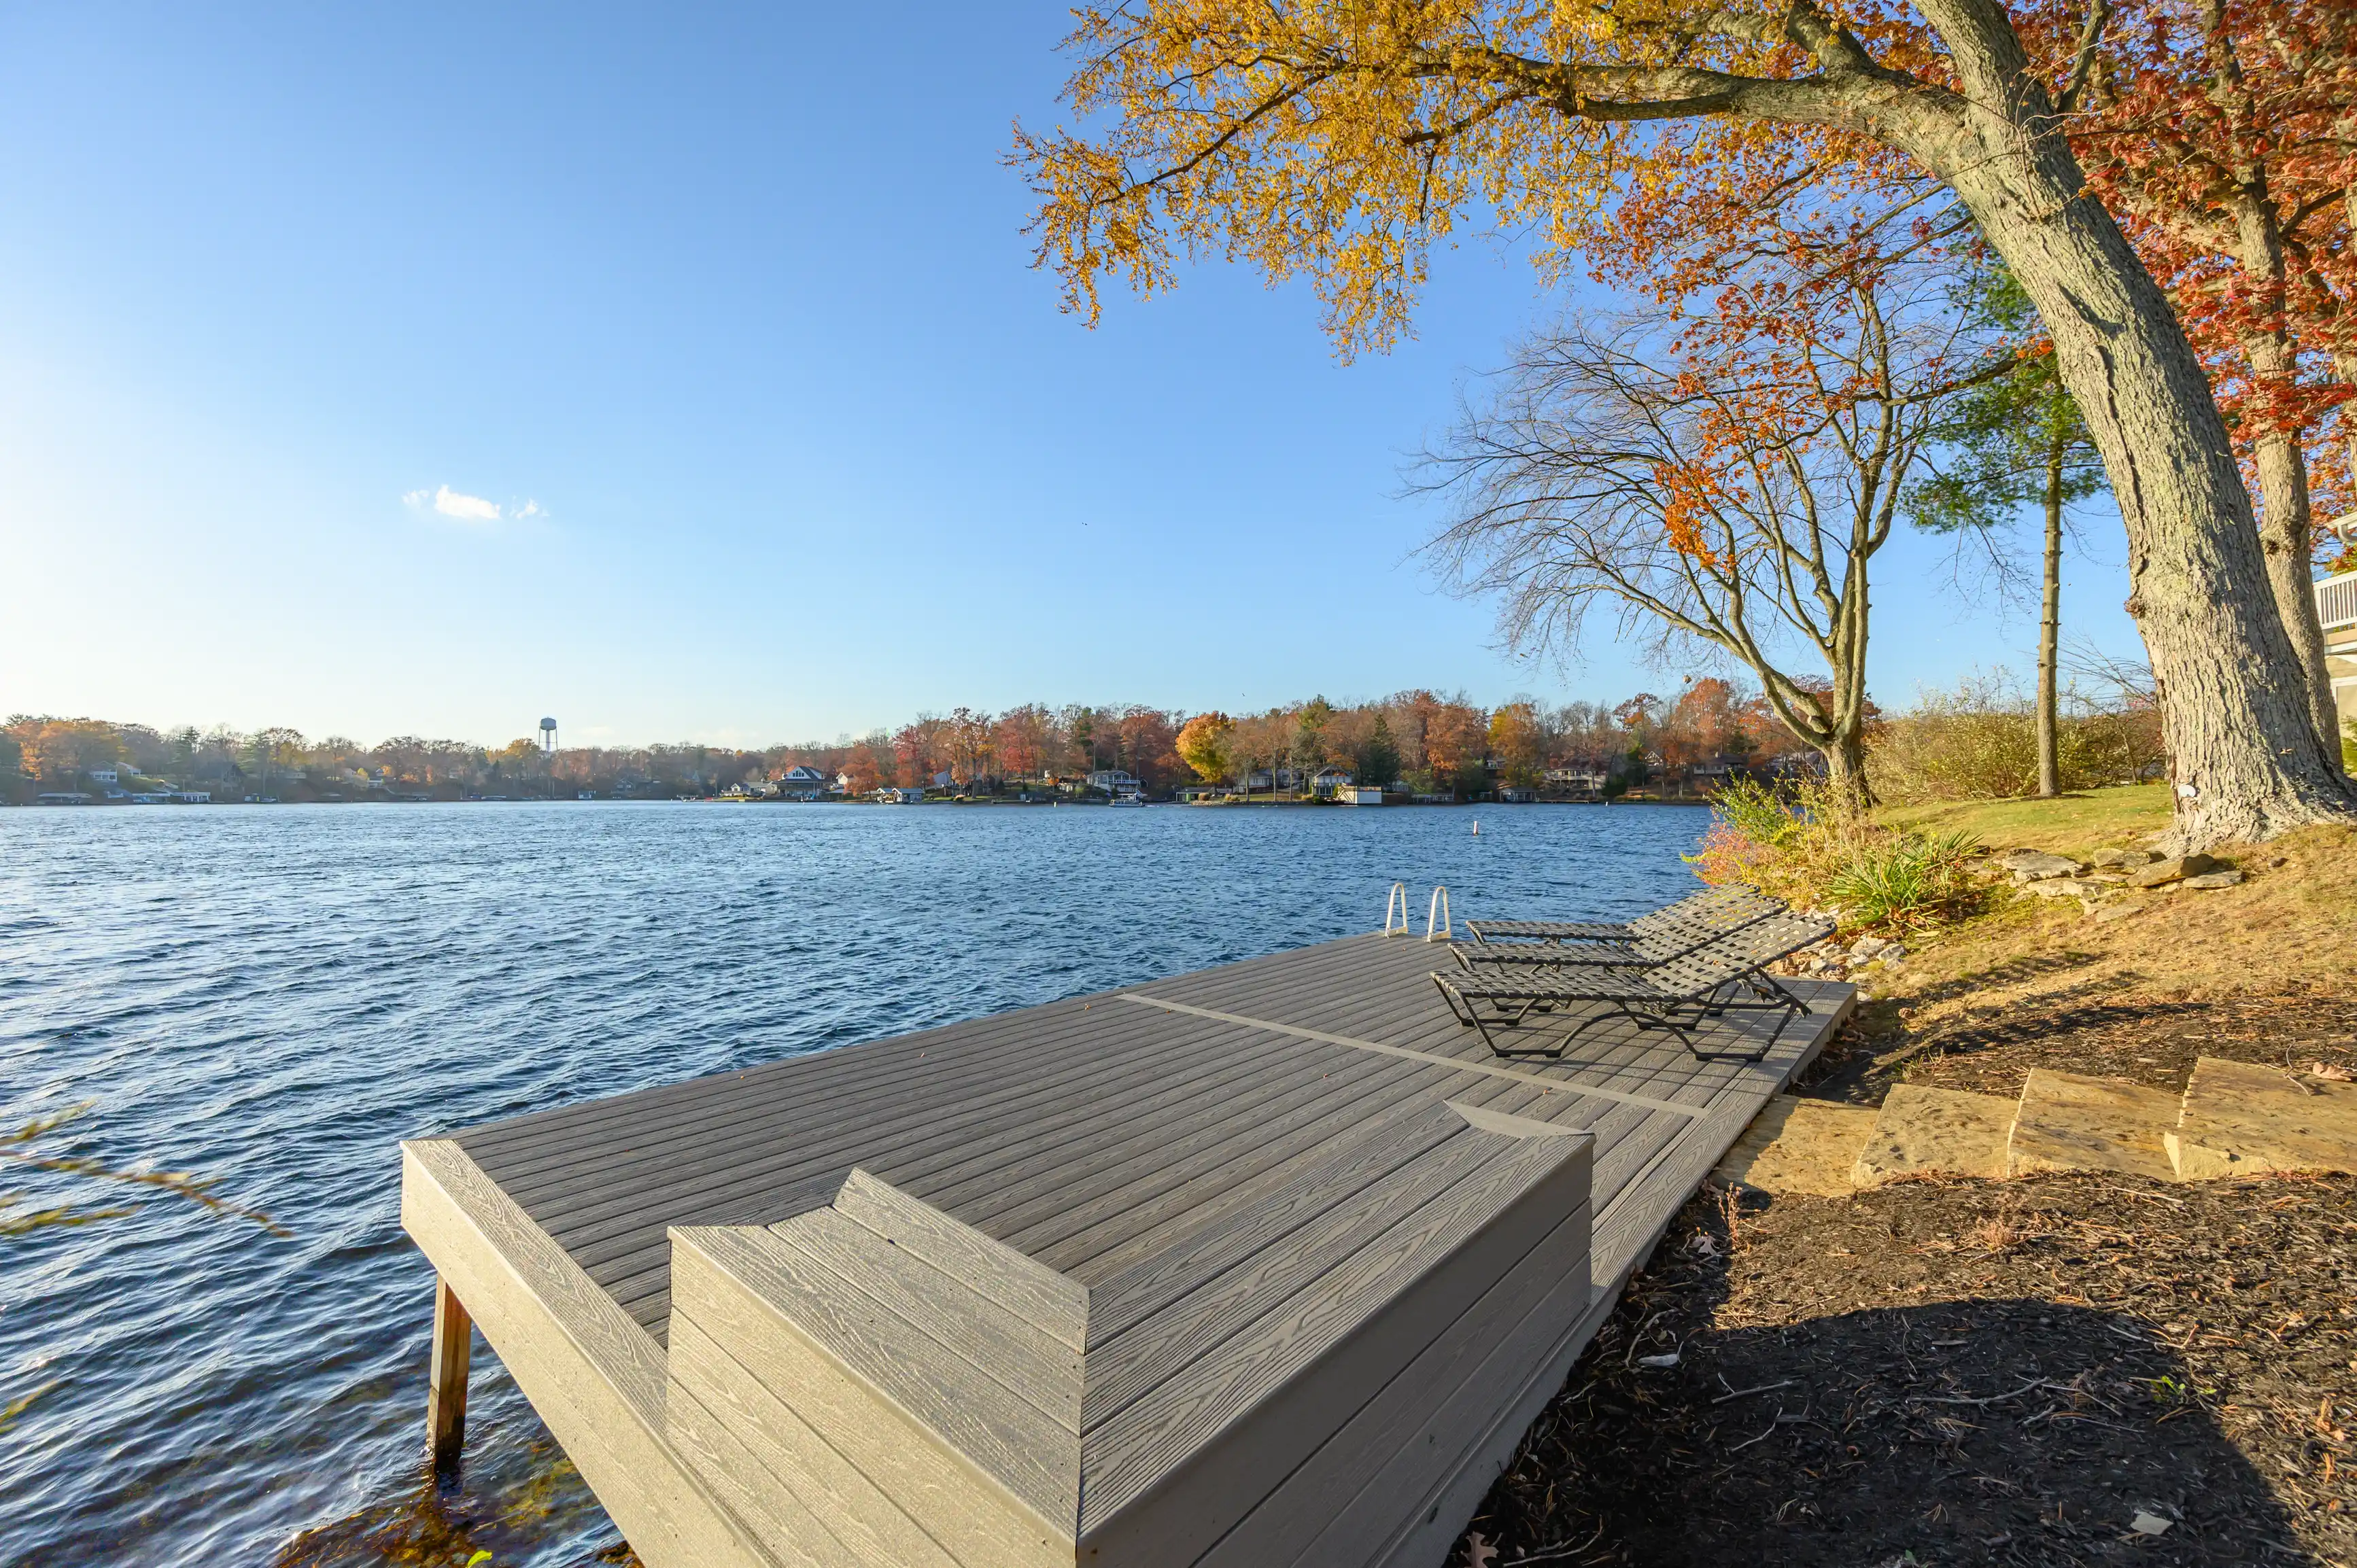 Autumn scene with a wooden dock extending into a peaceful lake, surrounded by trees with colorful fall foliage under a clear blue sky.